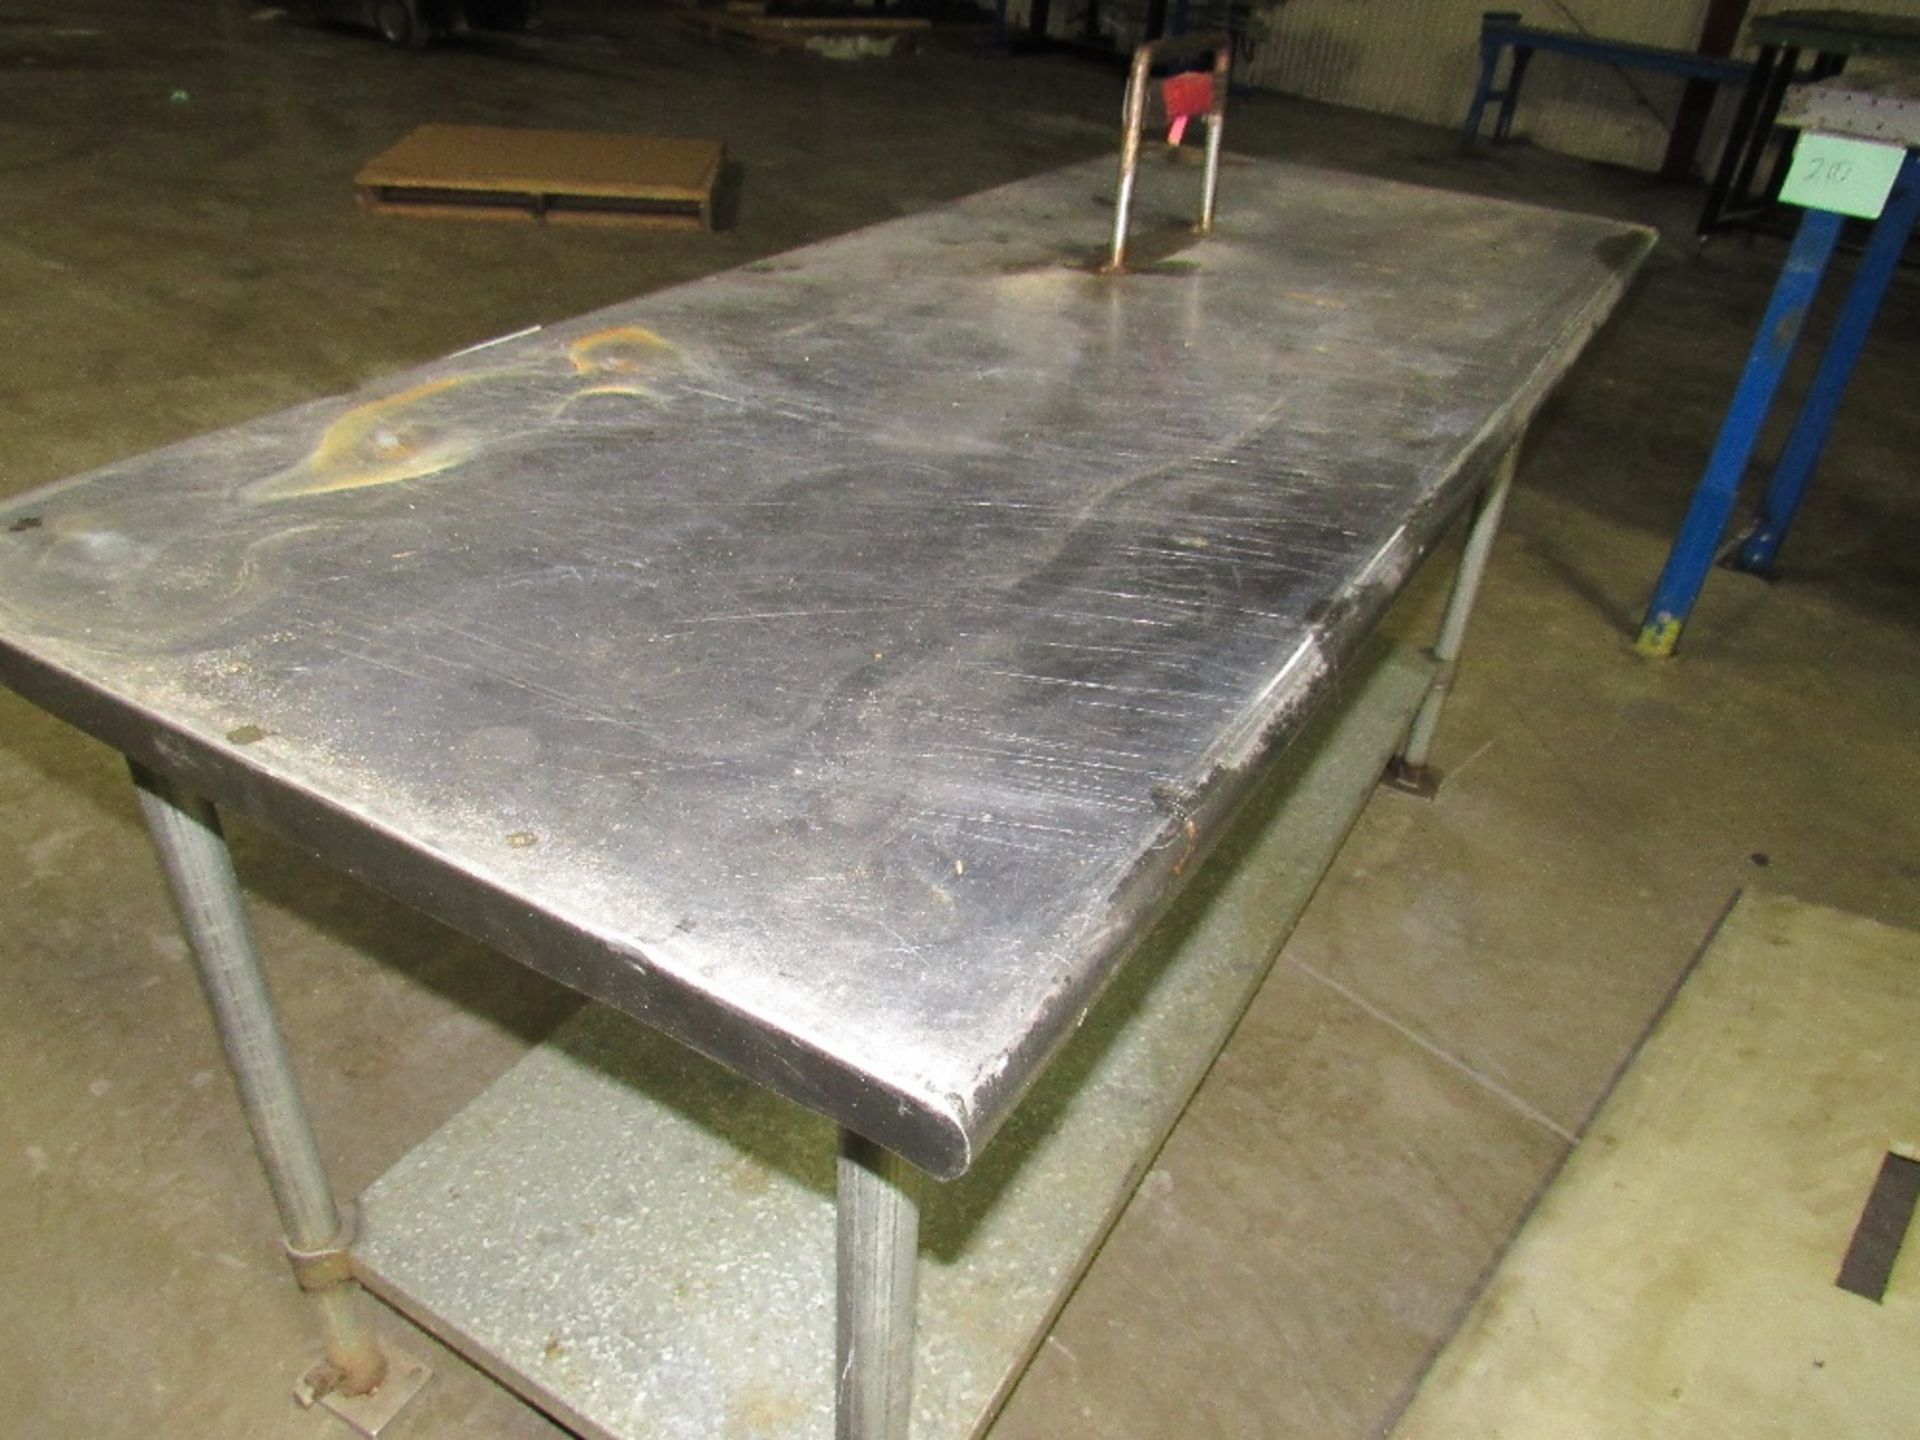 Stainless Steel Table with Teflon removable Plate Cover - Galvanized second surface -- (RIGGING - Image 14 of 14